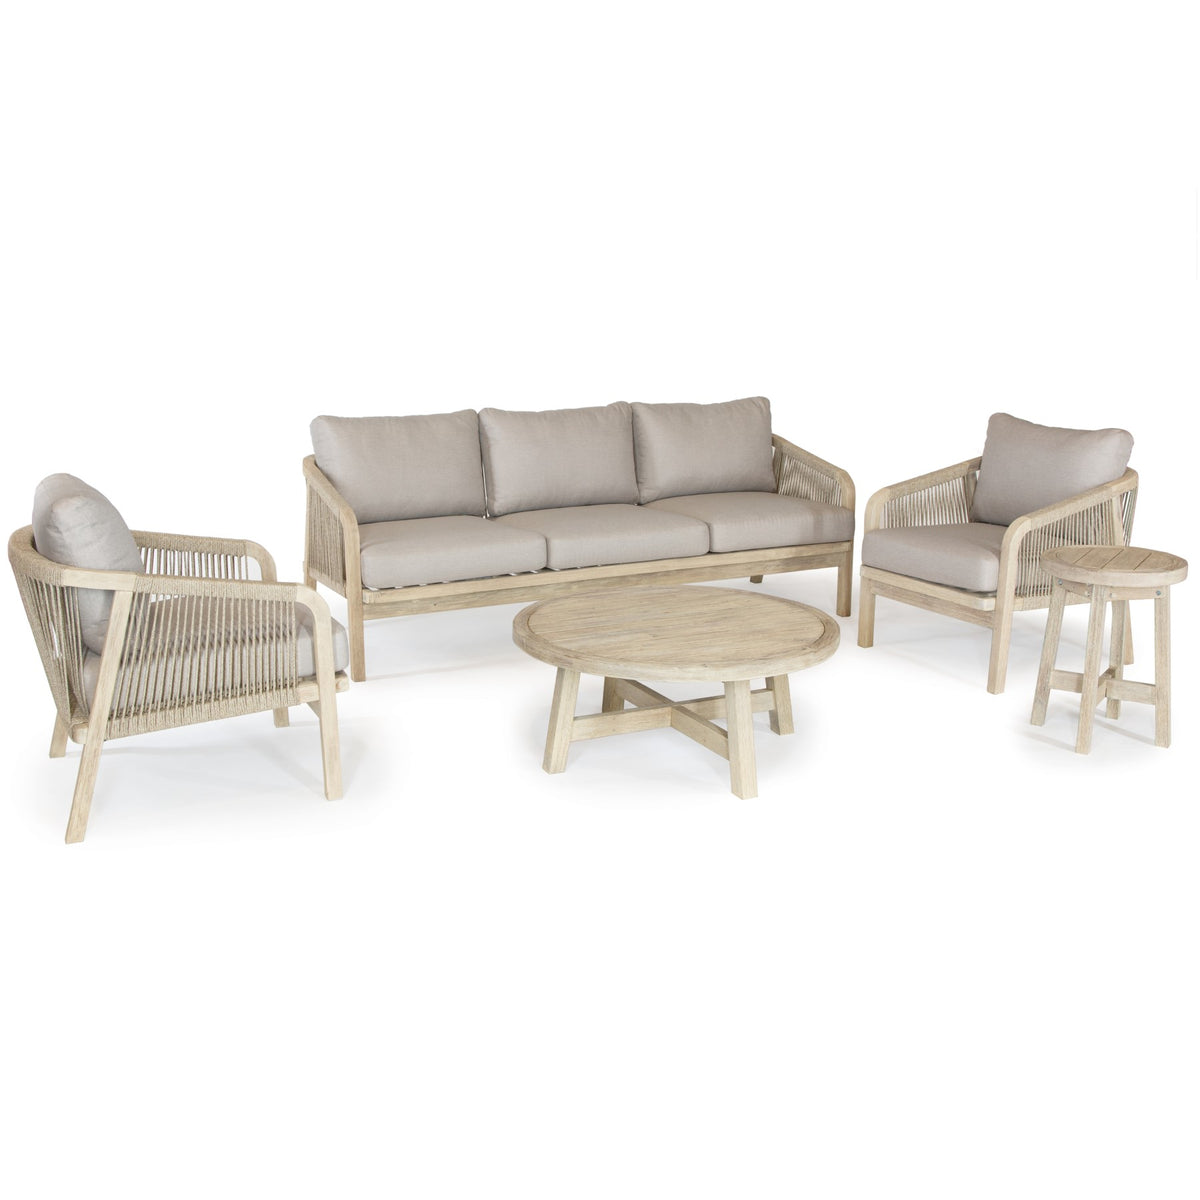 Kettler Cora 3 Seat Lounge Sofa Set With Armchairs and Coffee Table